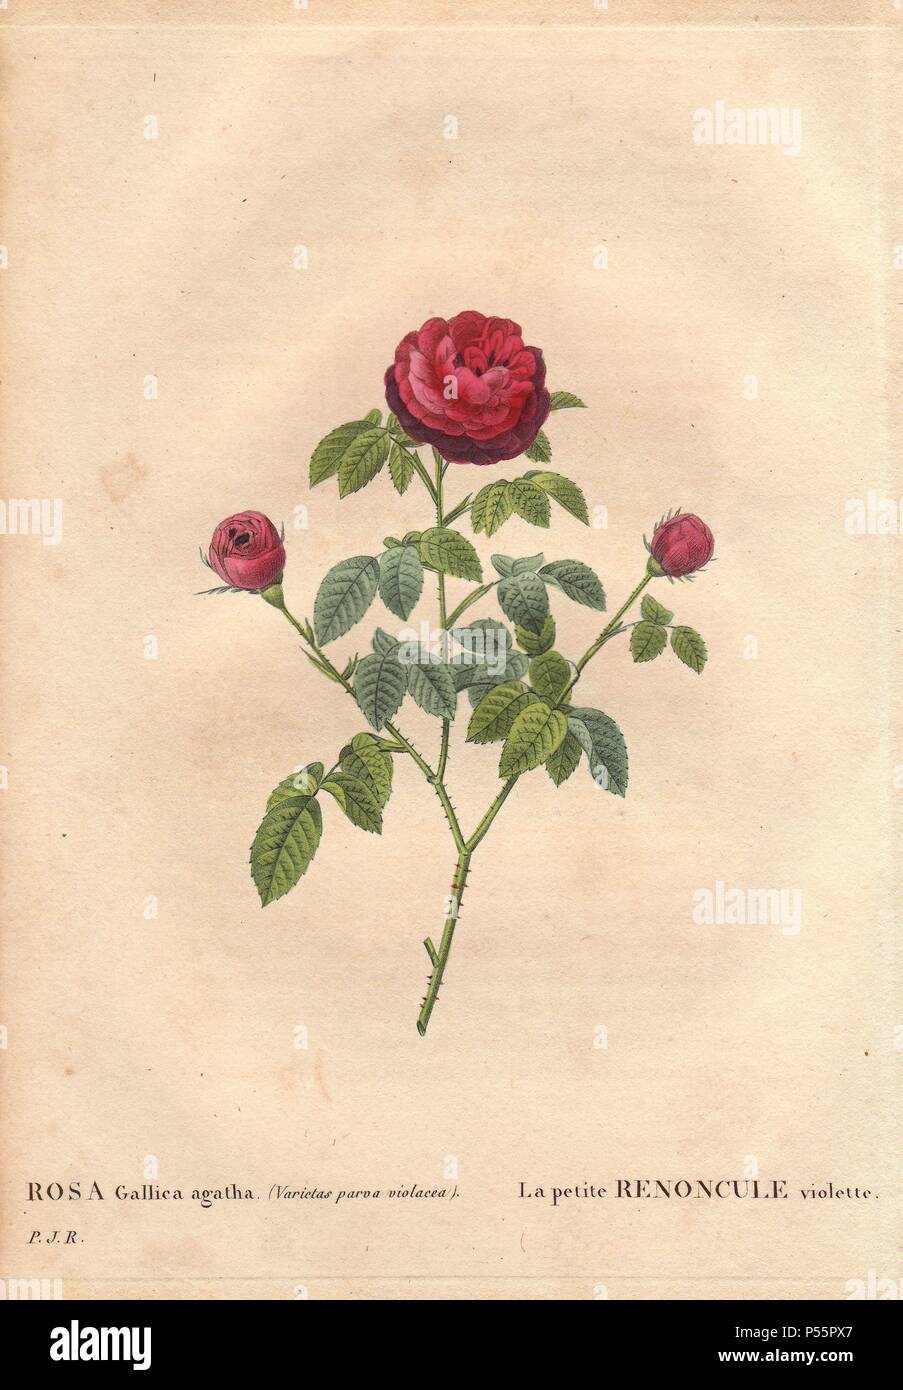 La Petite Renoncule rose with crimson and purple blooms (Rosa gallica agatha). La petite Renoncule violette. Bred by Monsieur Vibert, France, before 1824.. Hand-colored, octavo-size stipple copperplate engraving from Pierre Joseph Redoute's 'Les Roses' 1828. Stock Photo